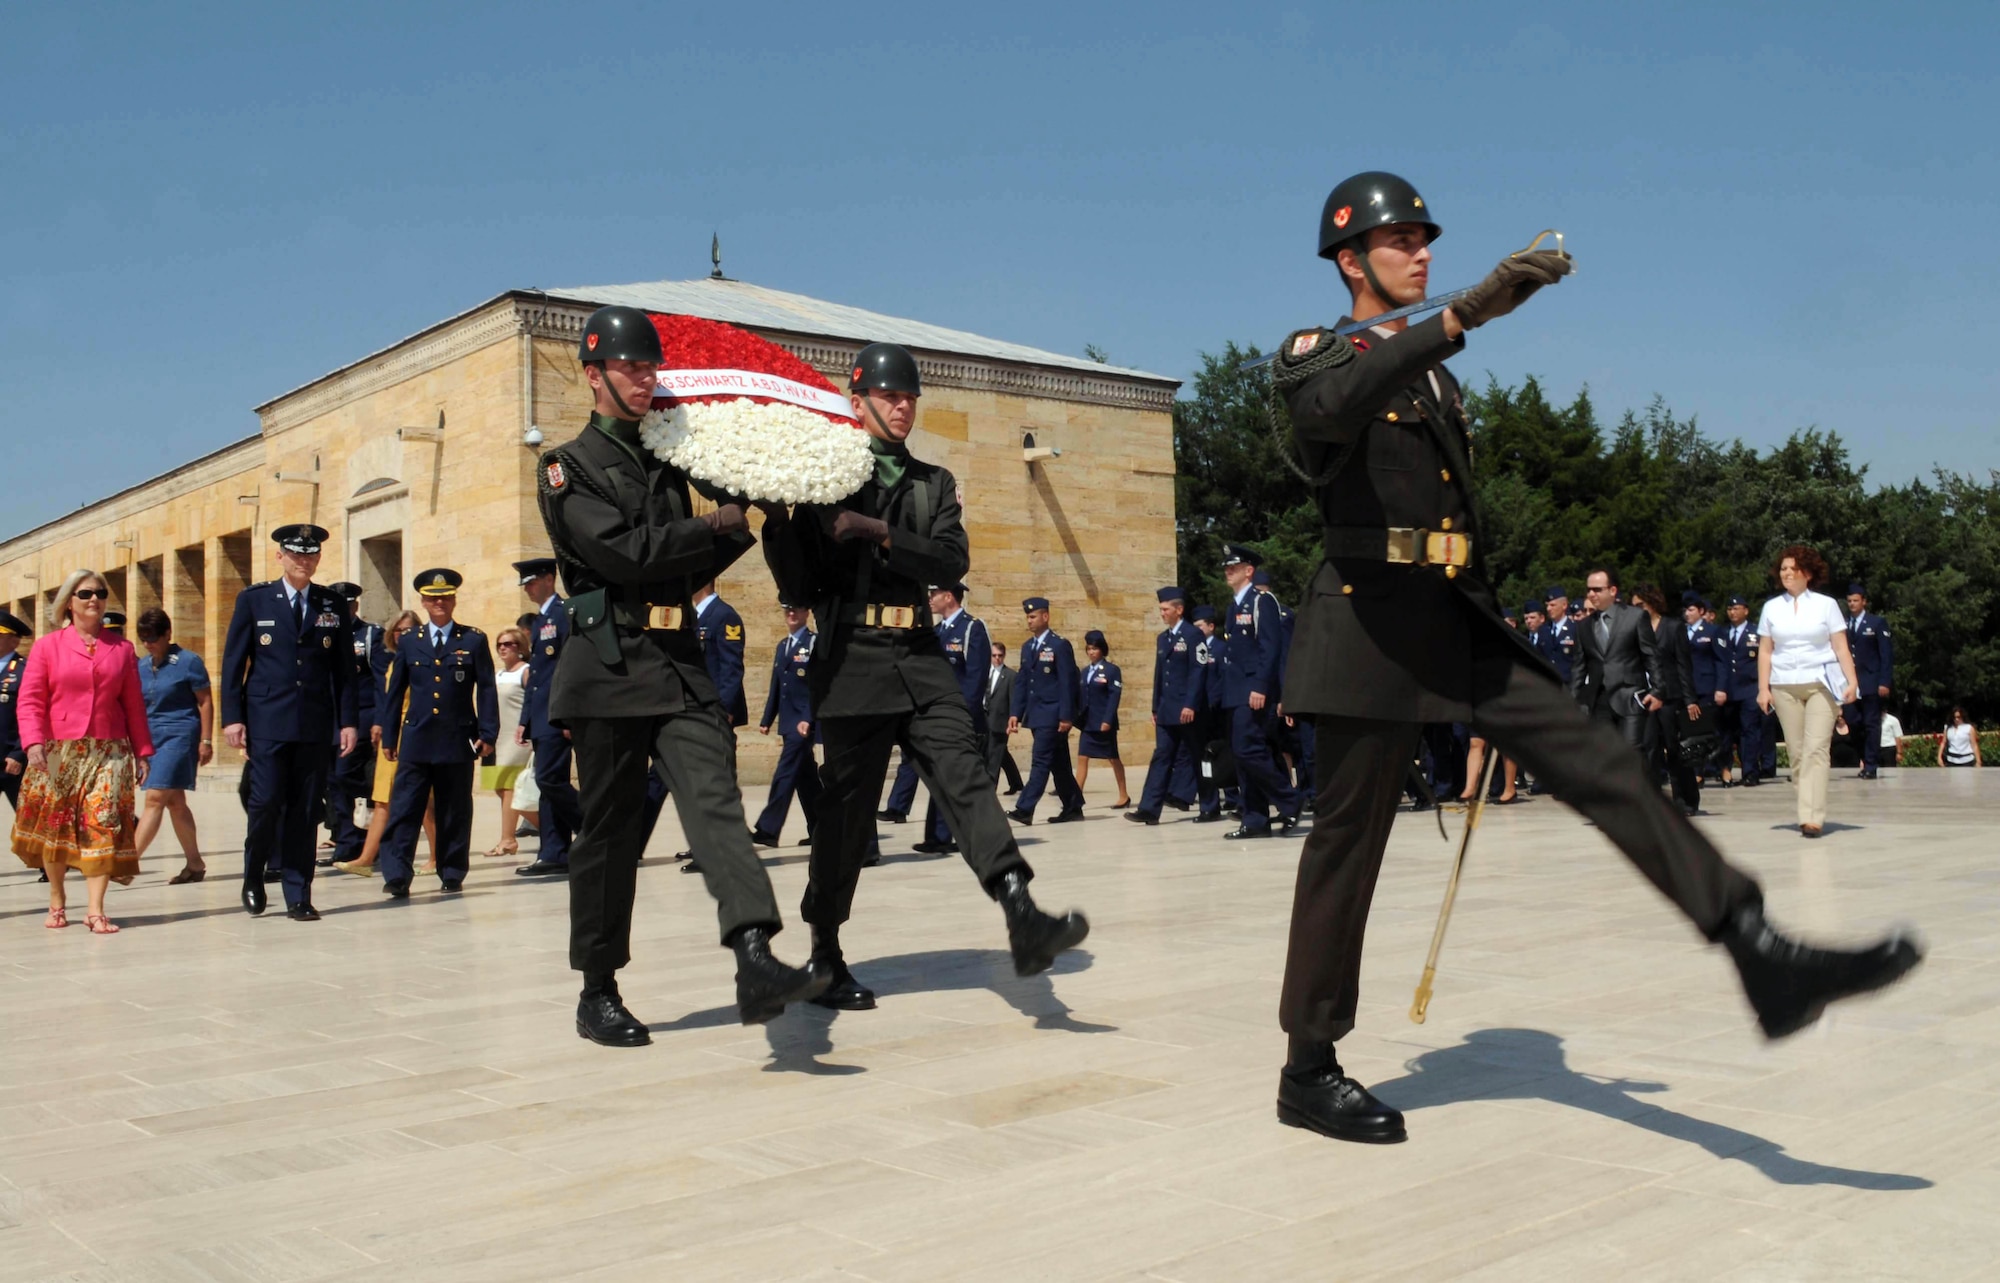 Turkish soldiers carry a wreath on behalf of Air Force Chief of Staff Gen. Norton Schwartz and his wife Suzie during a wreath-laying ceremony July 19, 2010, in Ankara, Turkey. The ceremony honored Mustafa Kemal Ataturk, the founder of the Republic of Turkey, and took place at Anitkabir, Ataturk's memorial and mausoleum. Airmen from local Air Force units accompanied the general and his wife in the ceremony. The ceremony was the first event during General Schwartz's multi-day visit to Turkey. (U.S. Air Force photo/Senior Airman Ashley Wood)